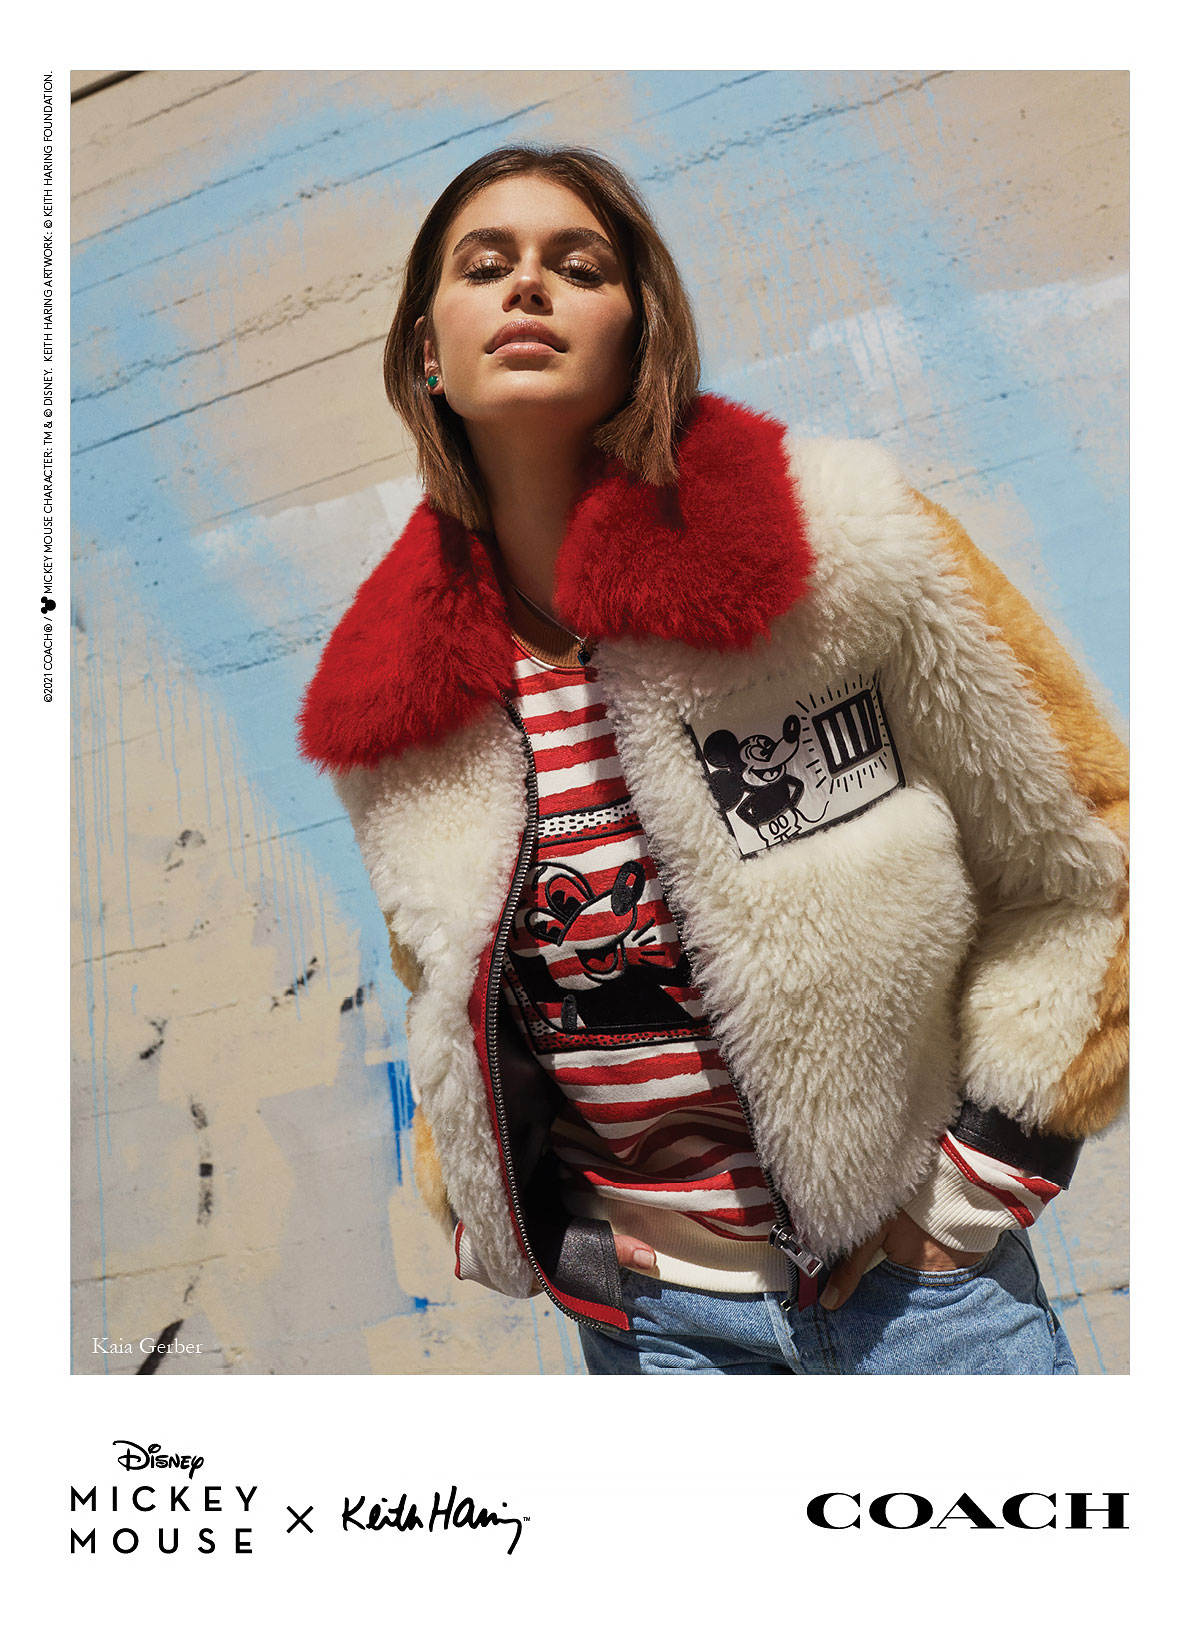 Kaia Gerber, Cole Sprouse and More Stars in Coach's Mickey Mouse x Keith Haring Campaign